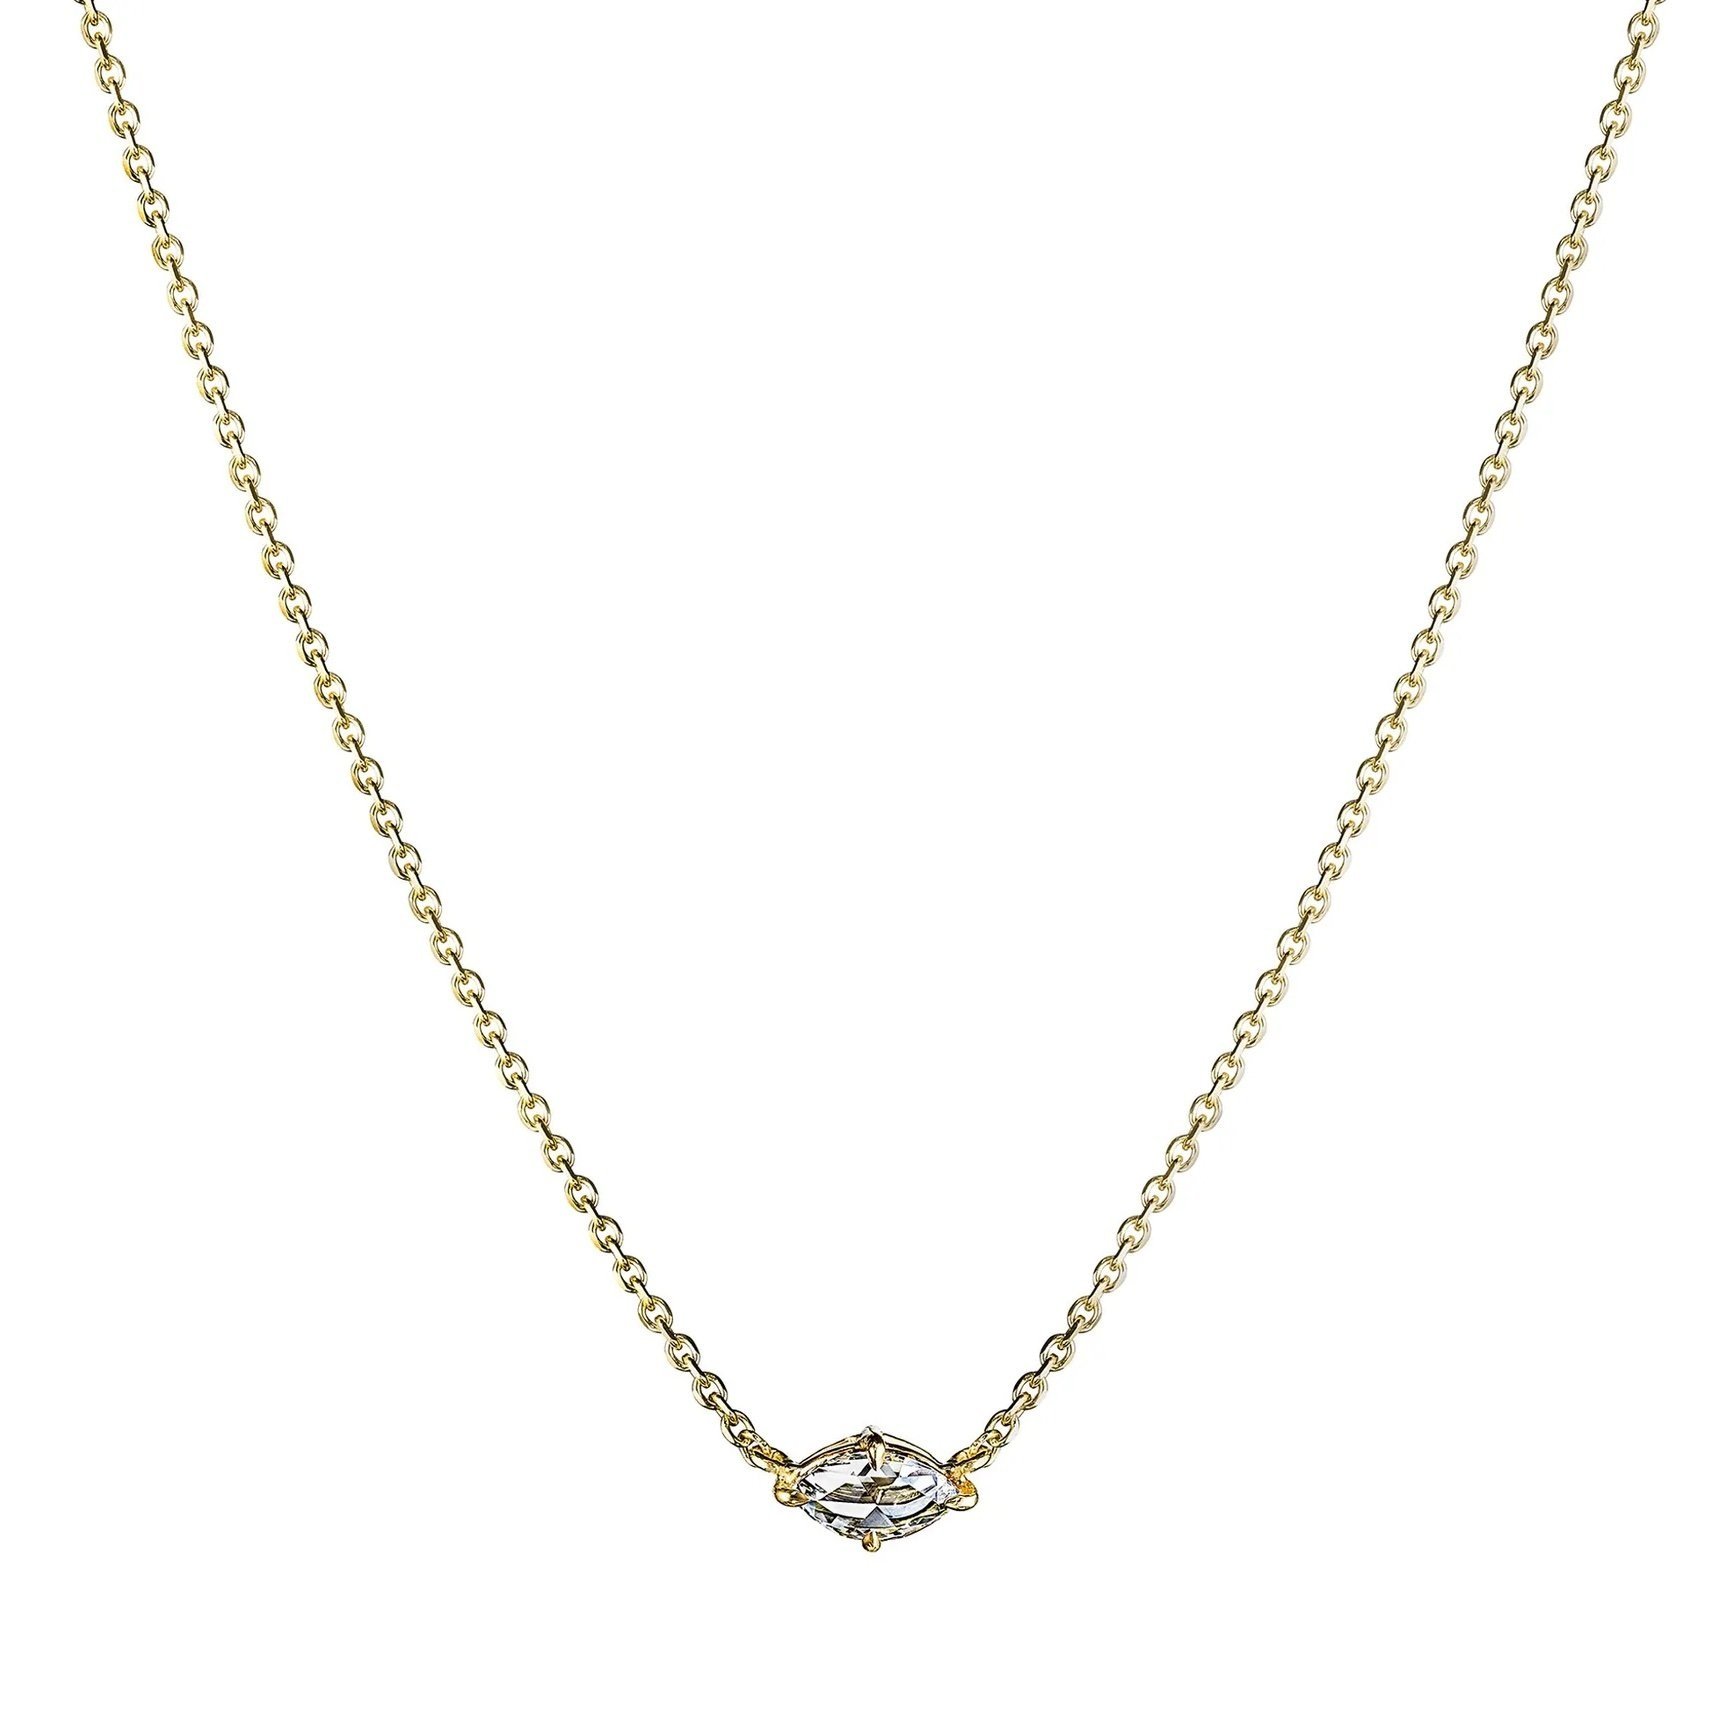 Mimi So solitaire necklace in 18k yellow gold with diamond, $4,900 at Mimi So